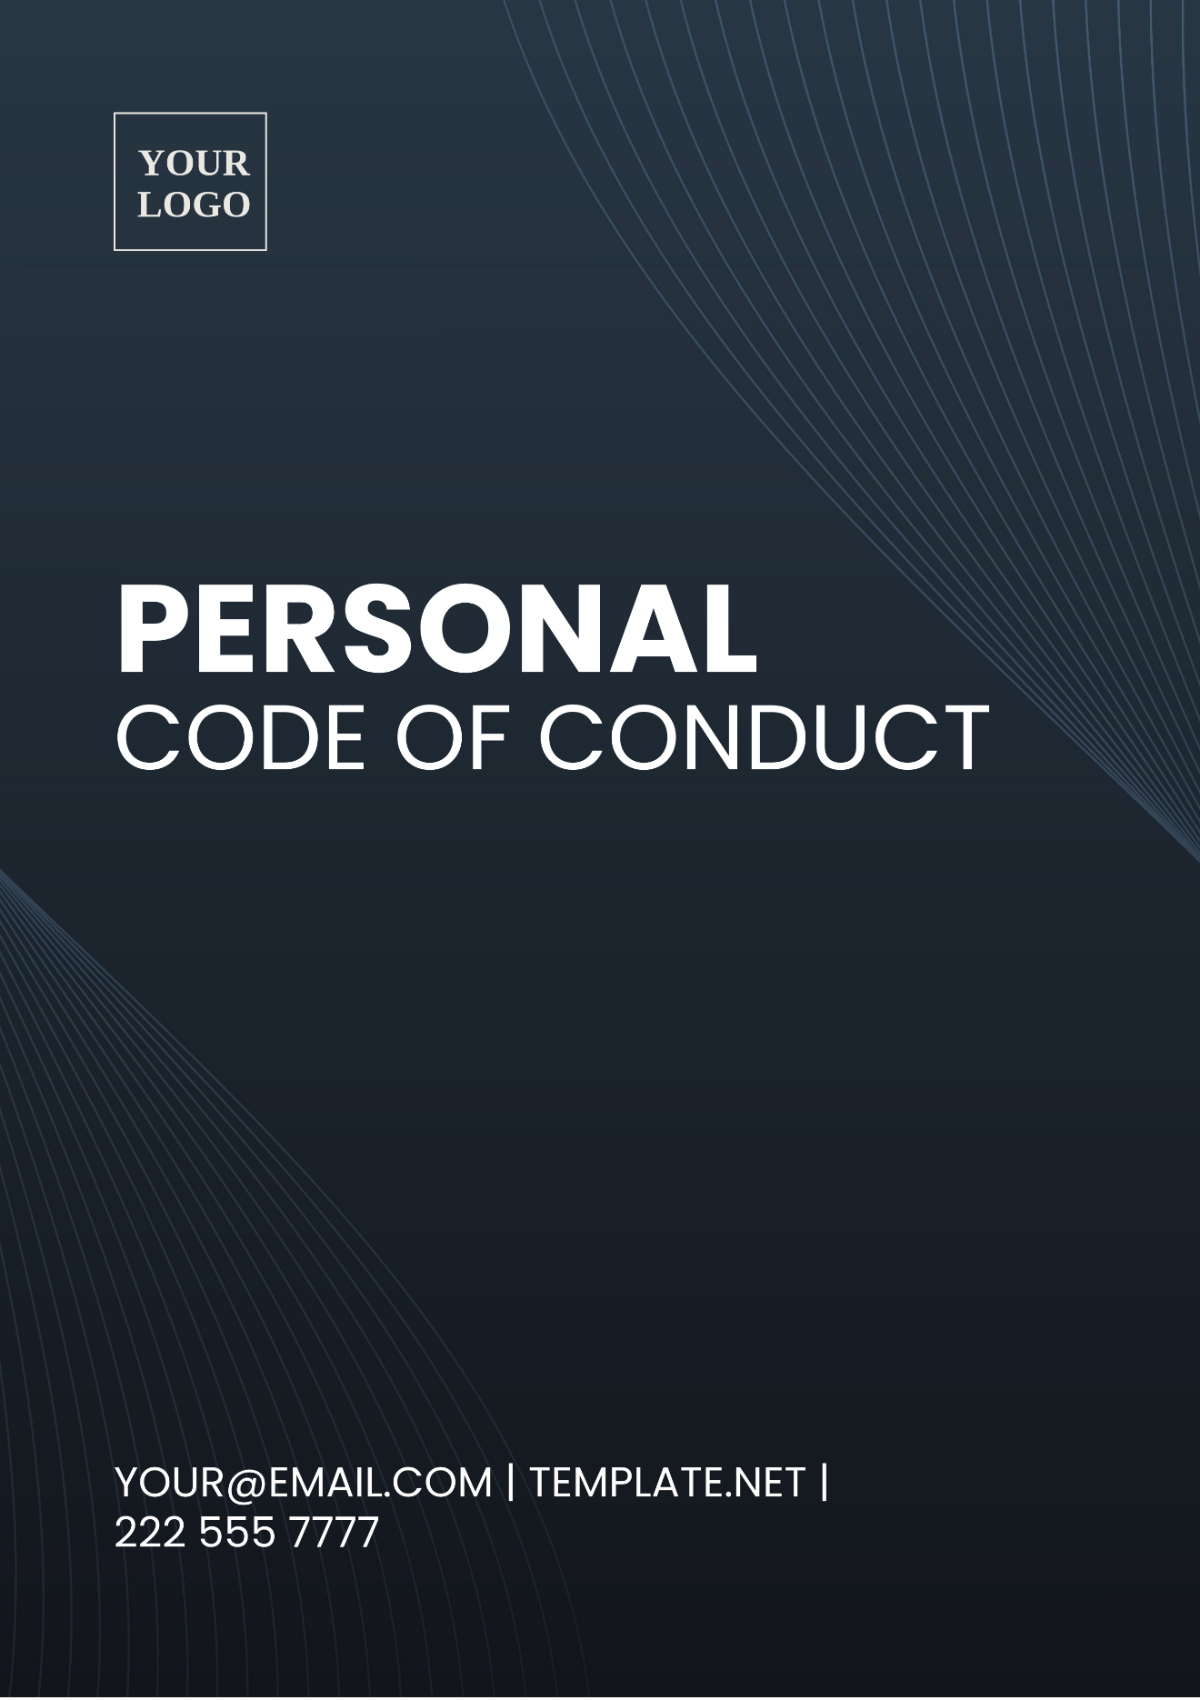 Personal Code of Conduct Template